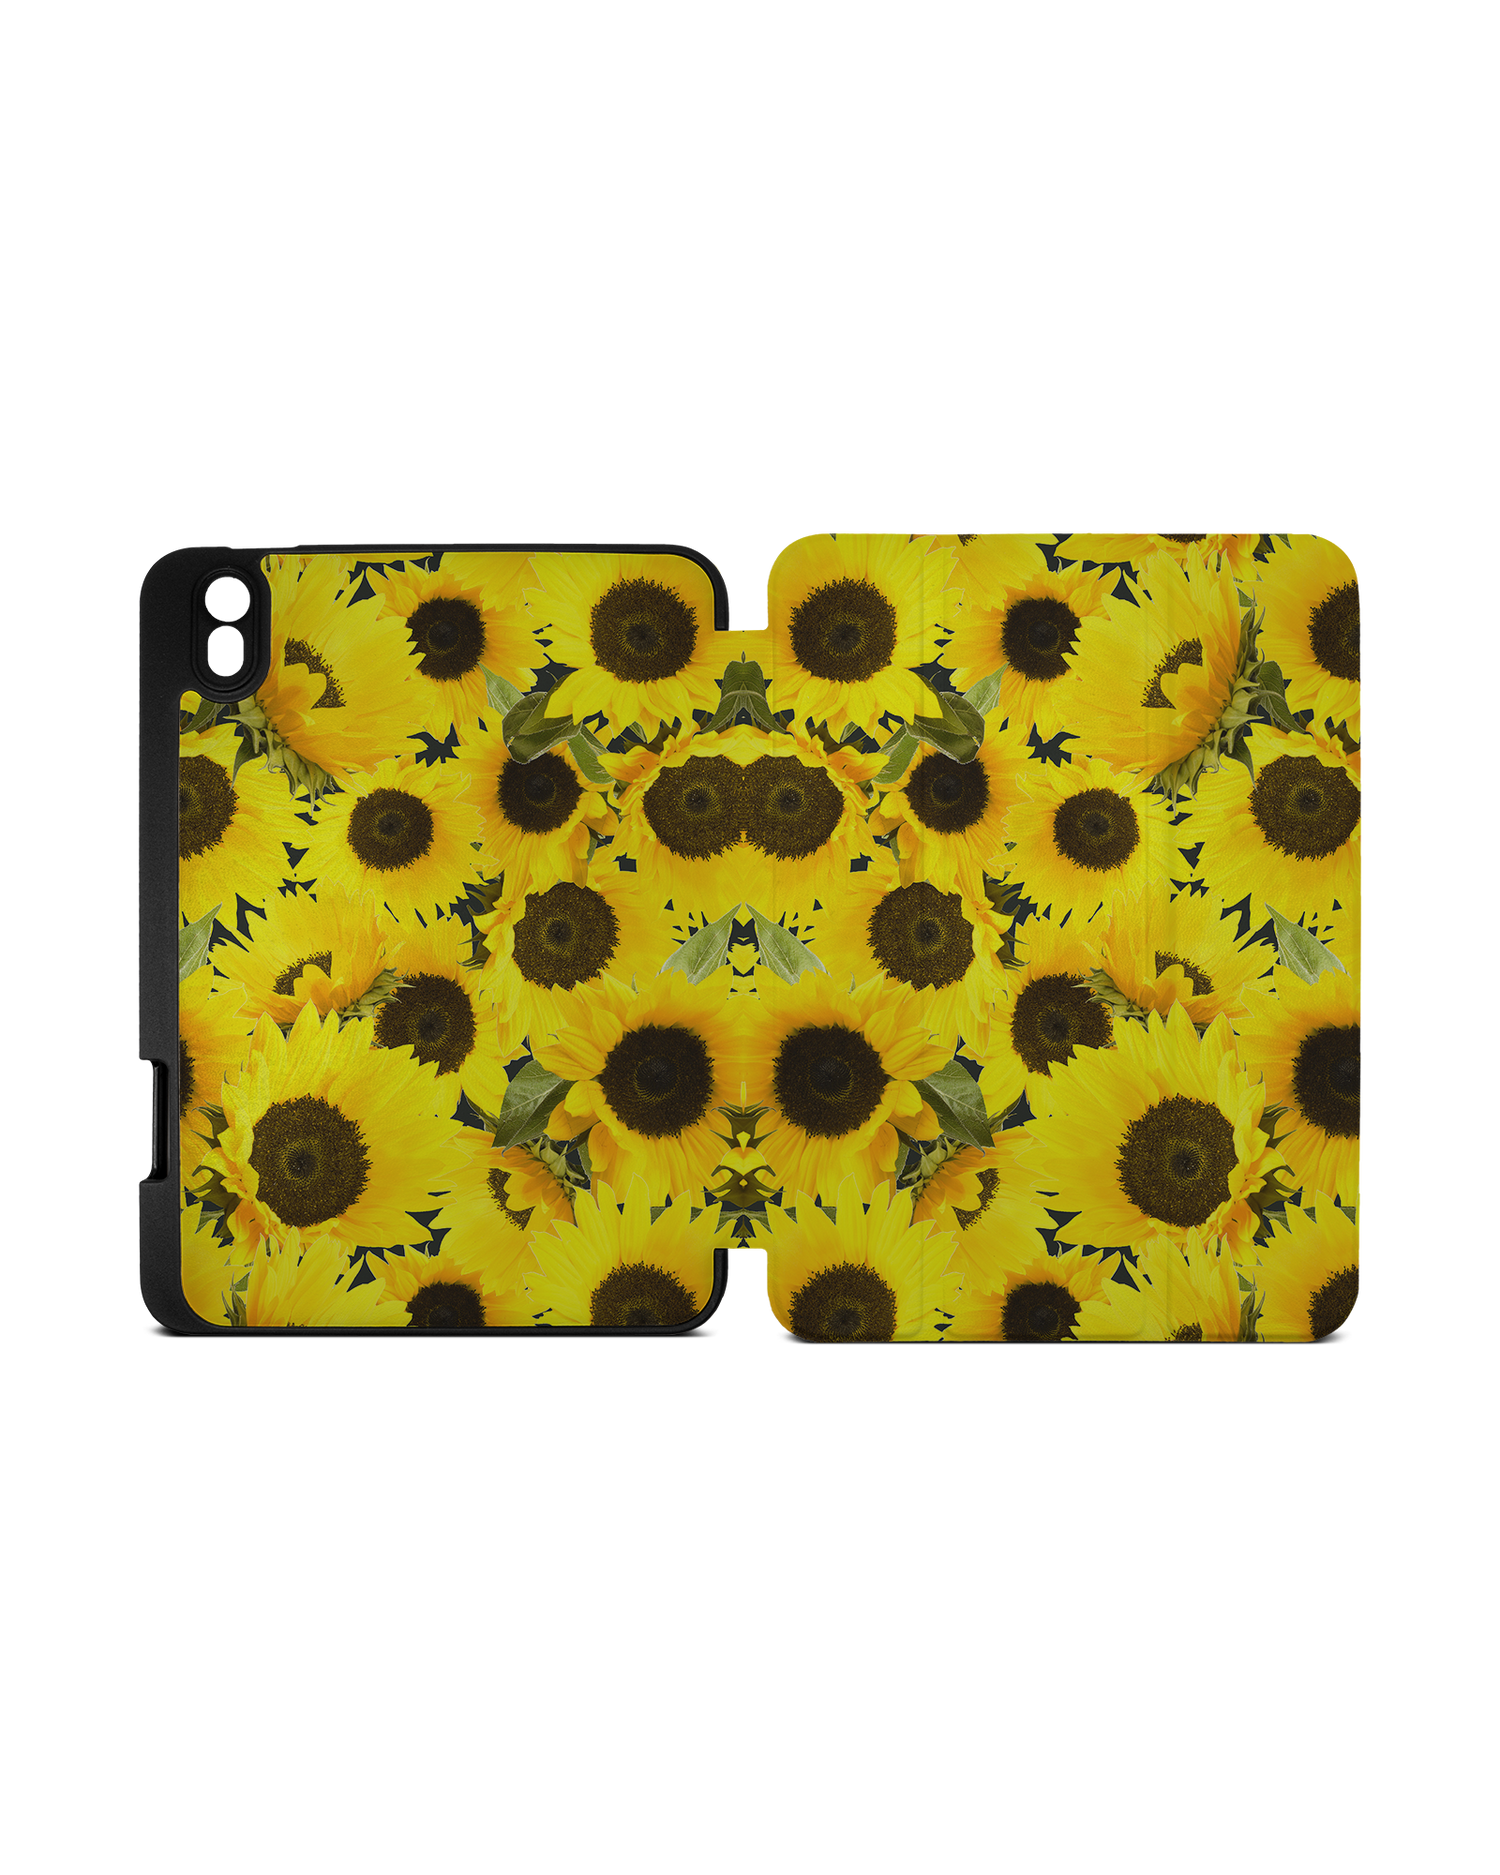 Sunflowers iPad Case with Pencil Holder Apple iPad mini 6 (2021): Opened exterior view